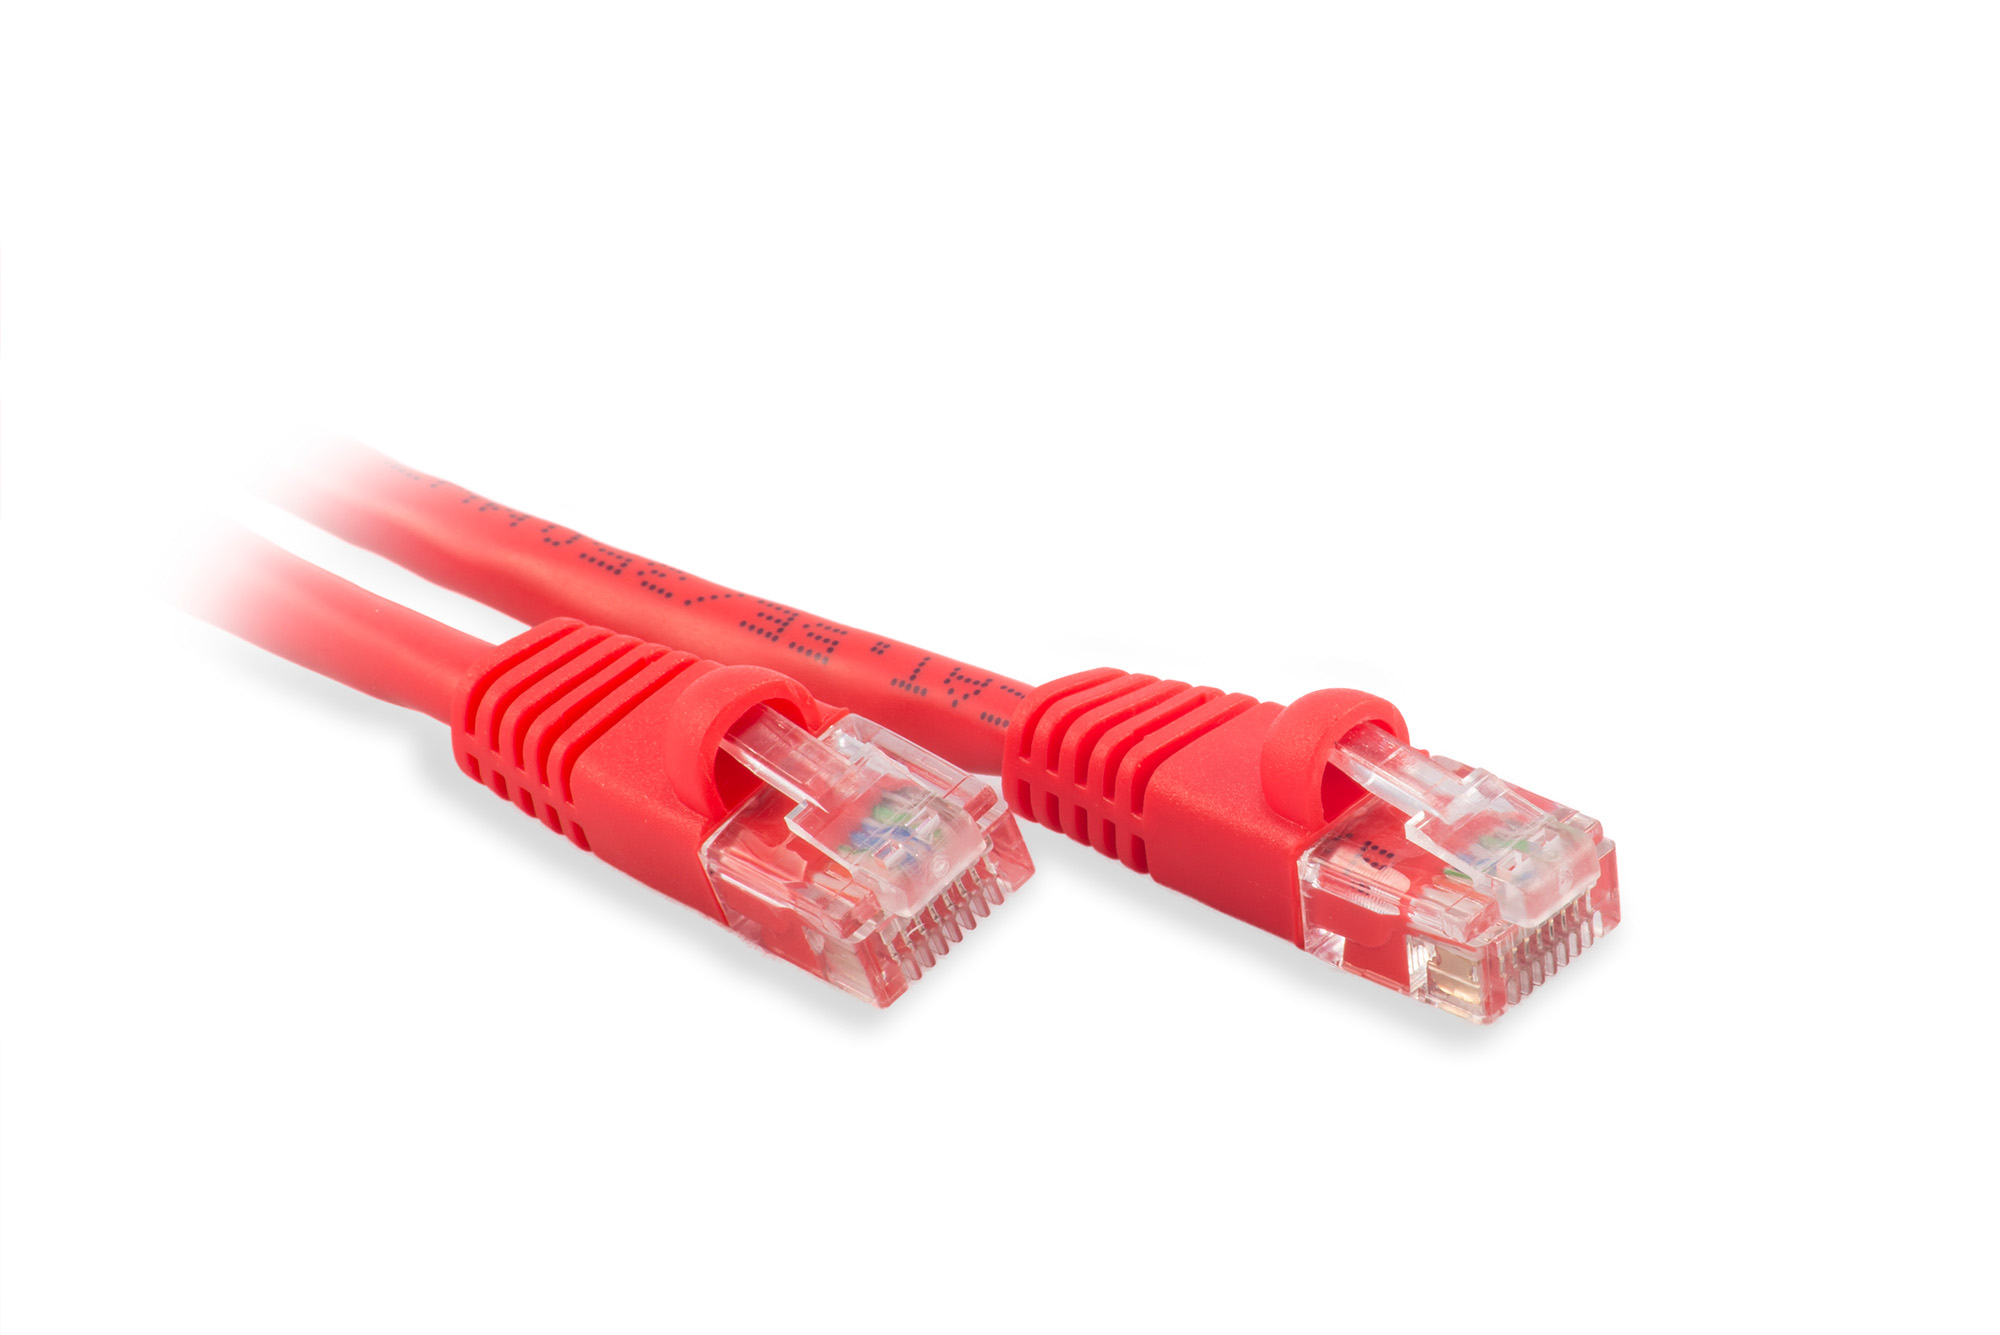 40ft Cat5e Ethernet Patch Cable - Red Color - Snagless Boot